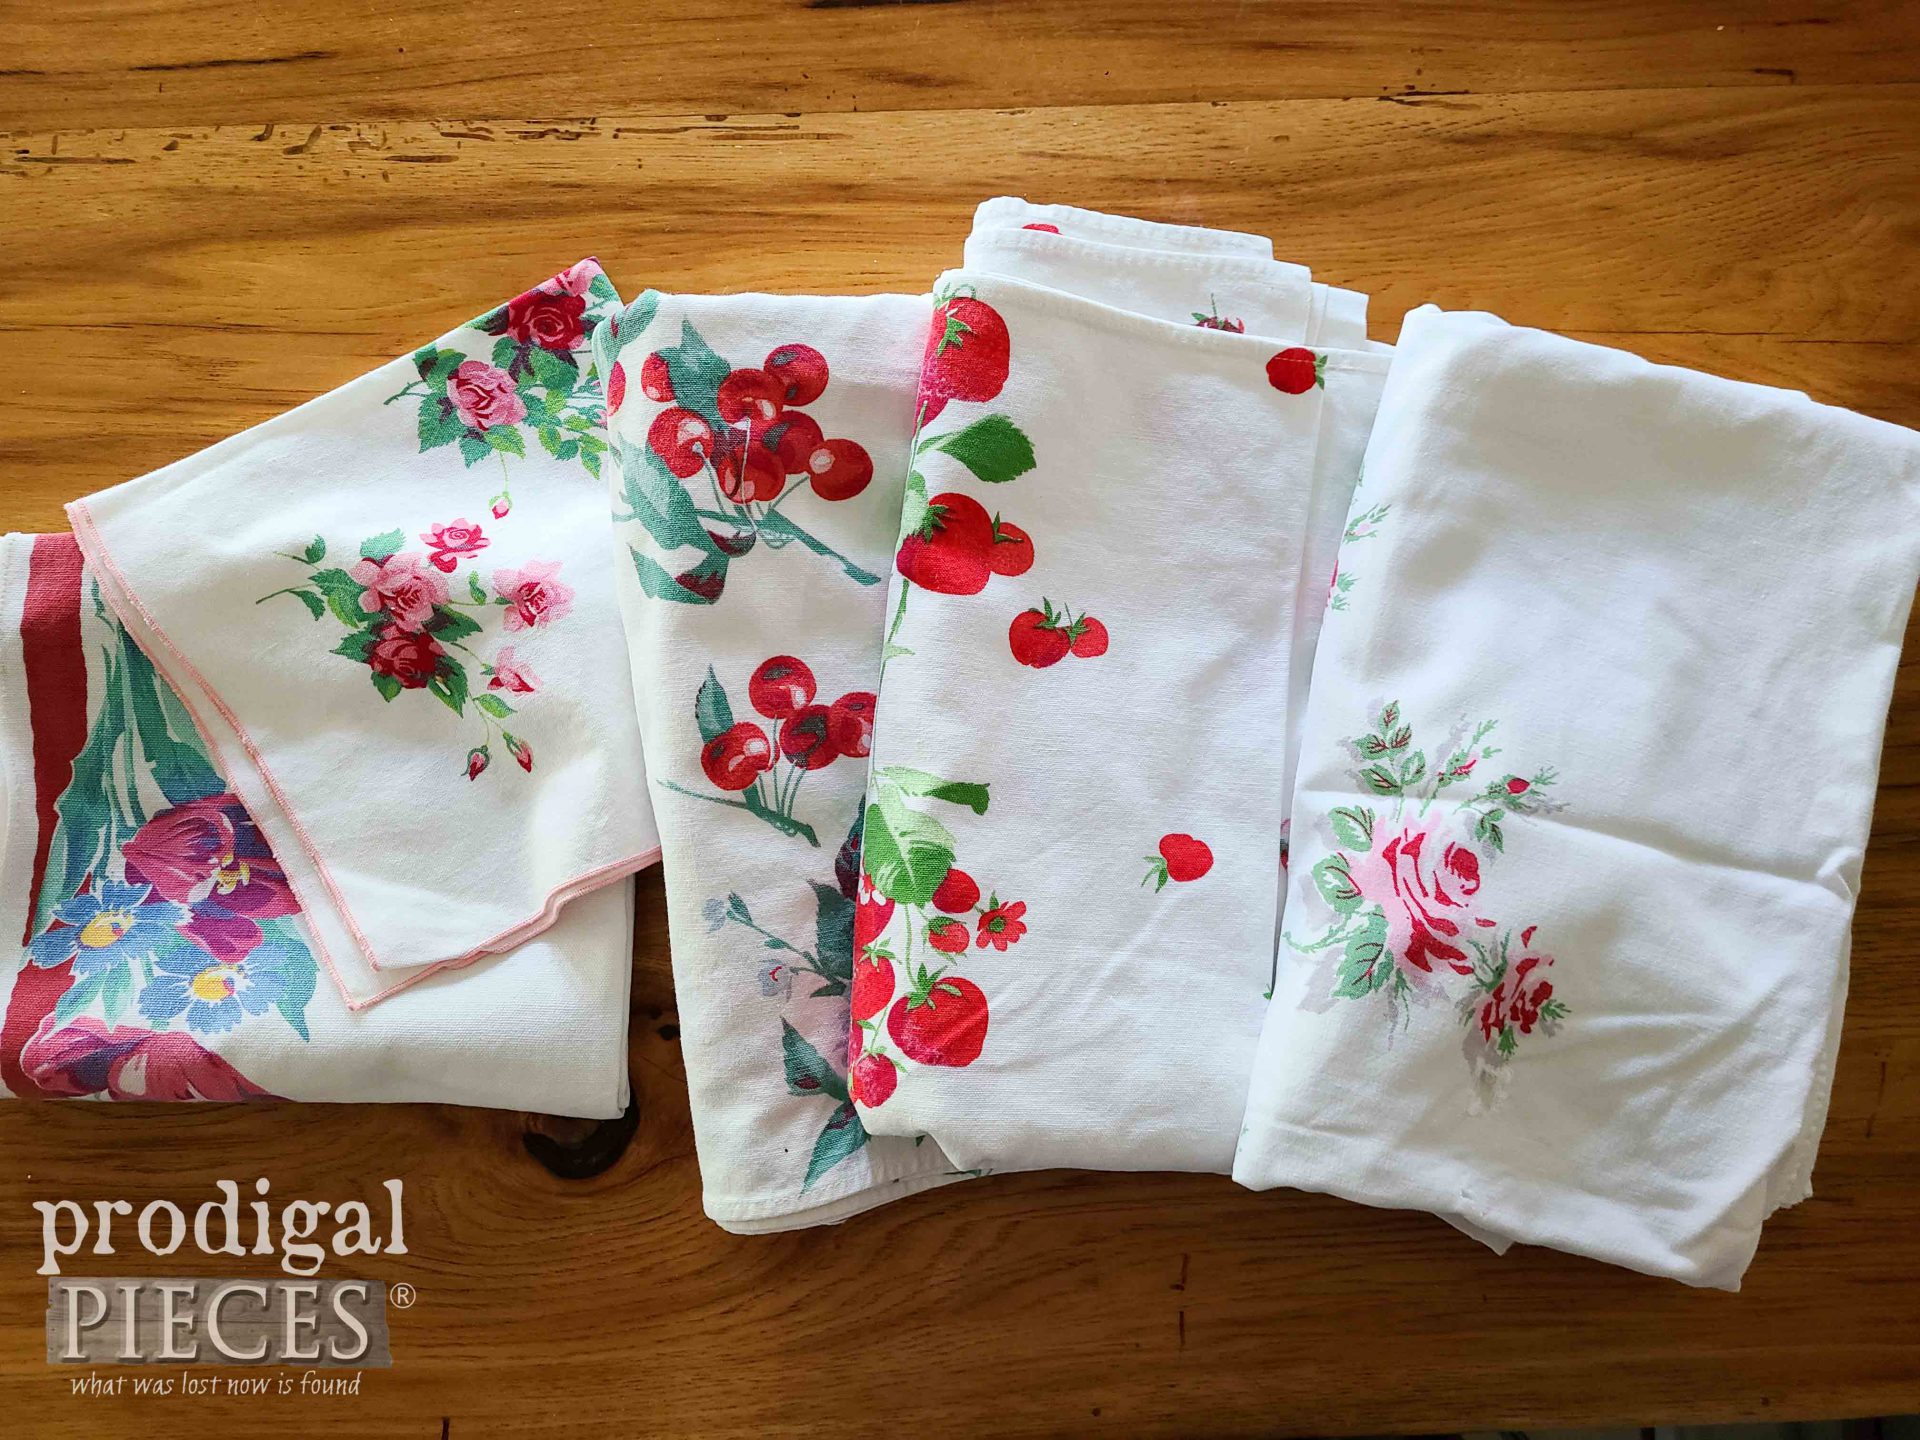 Damaged Vintage Tablecloth Before Upcycle | prodigalpieces.com #prodigalpieces